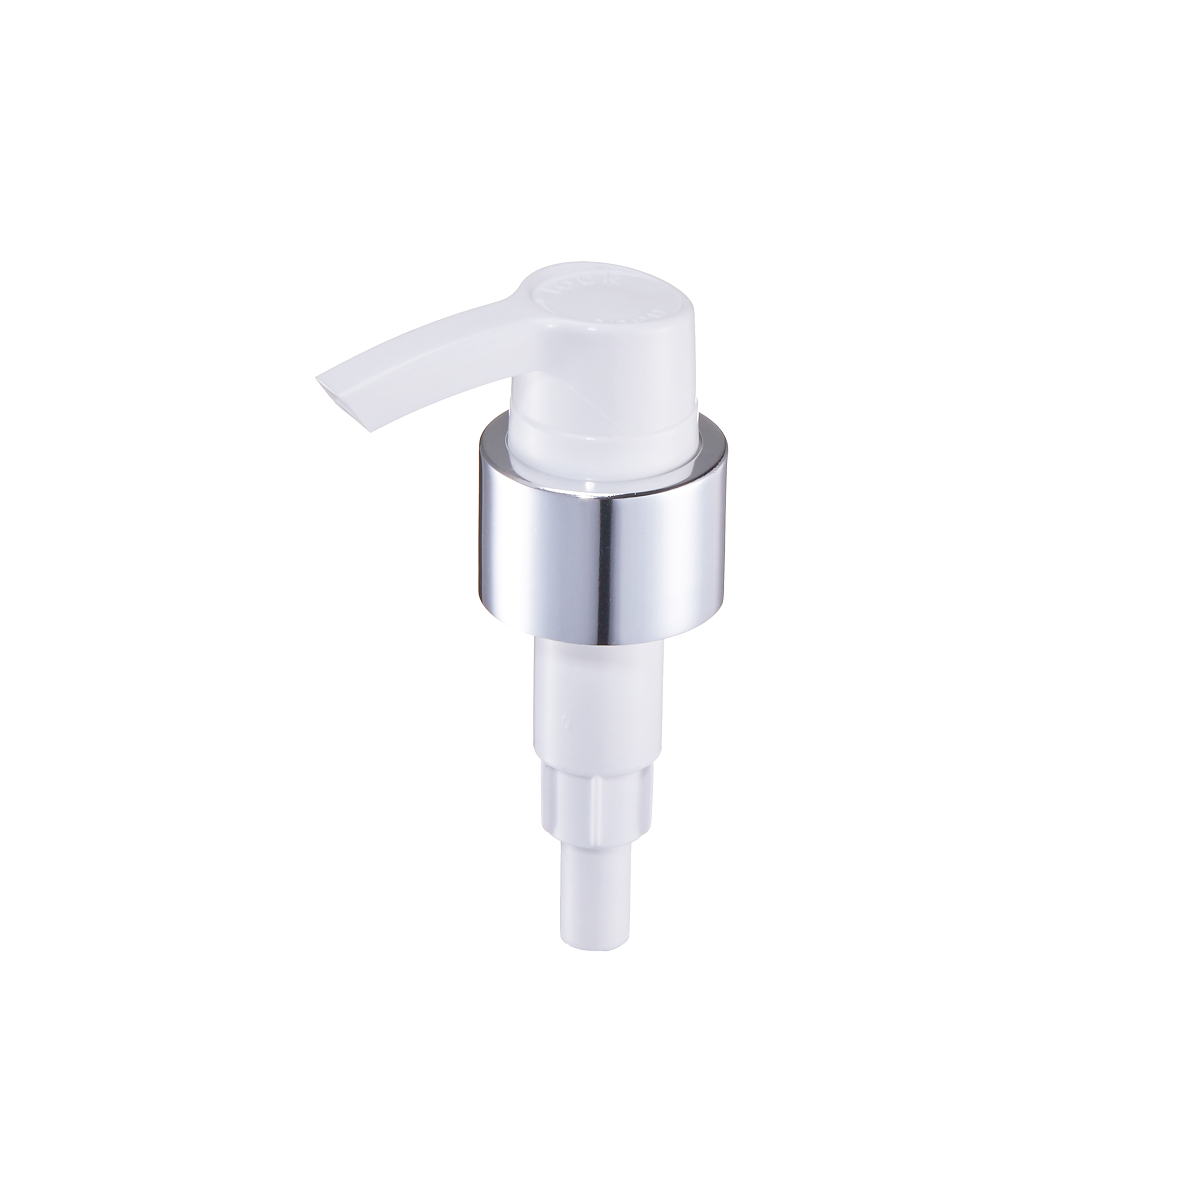 24mm Lotion Pump Manufacturing Company